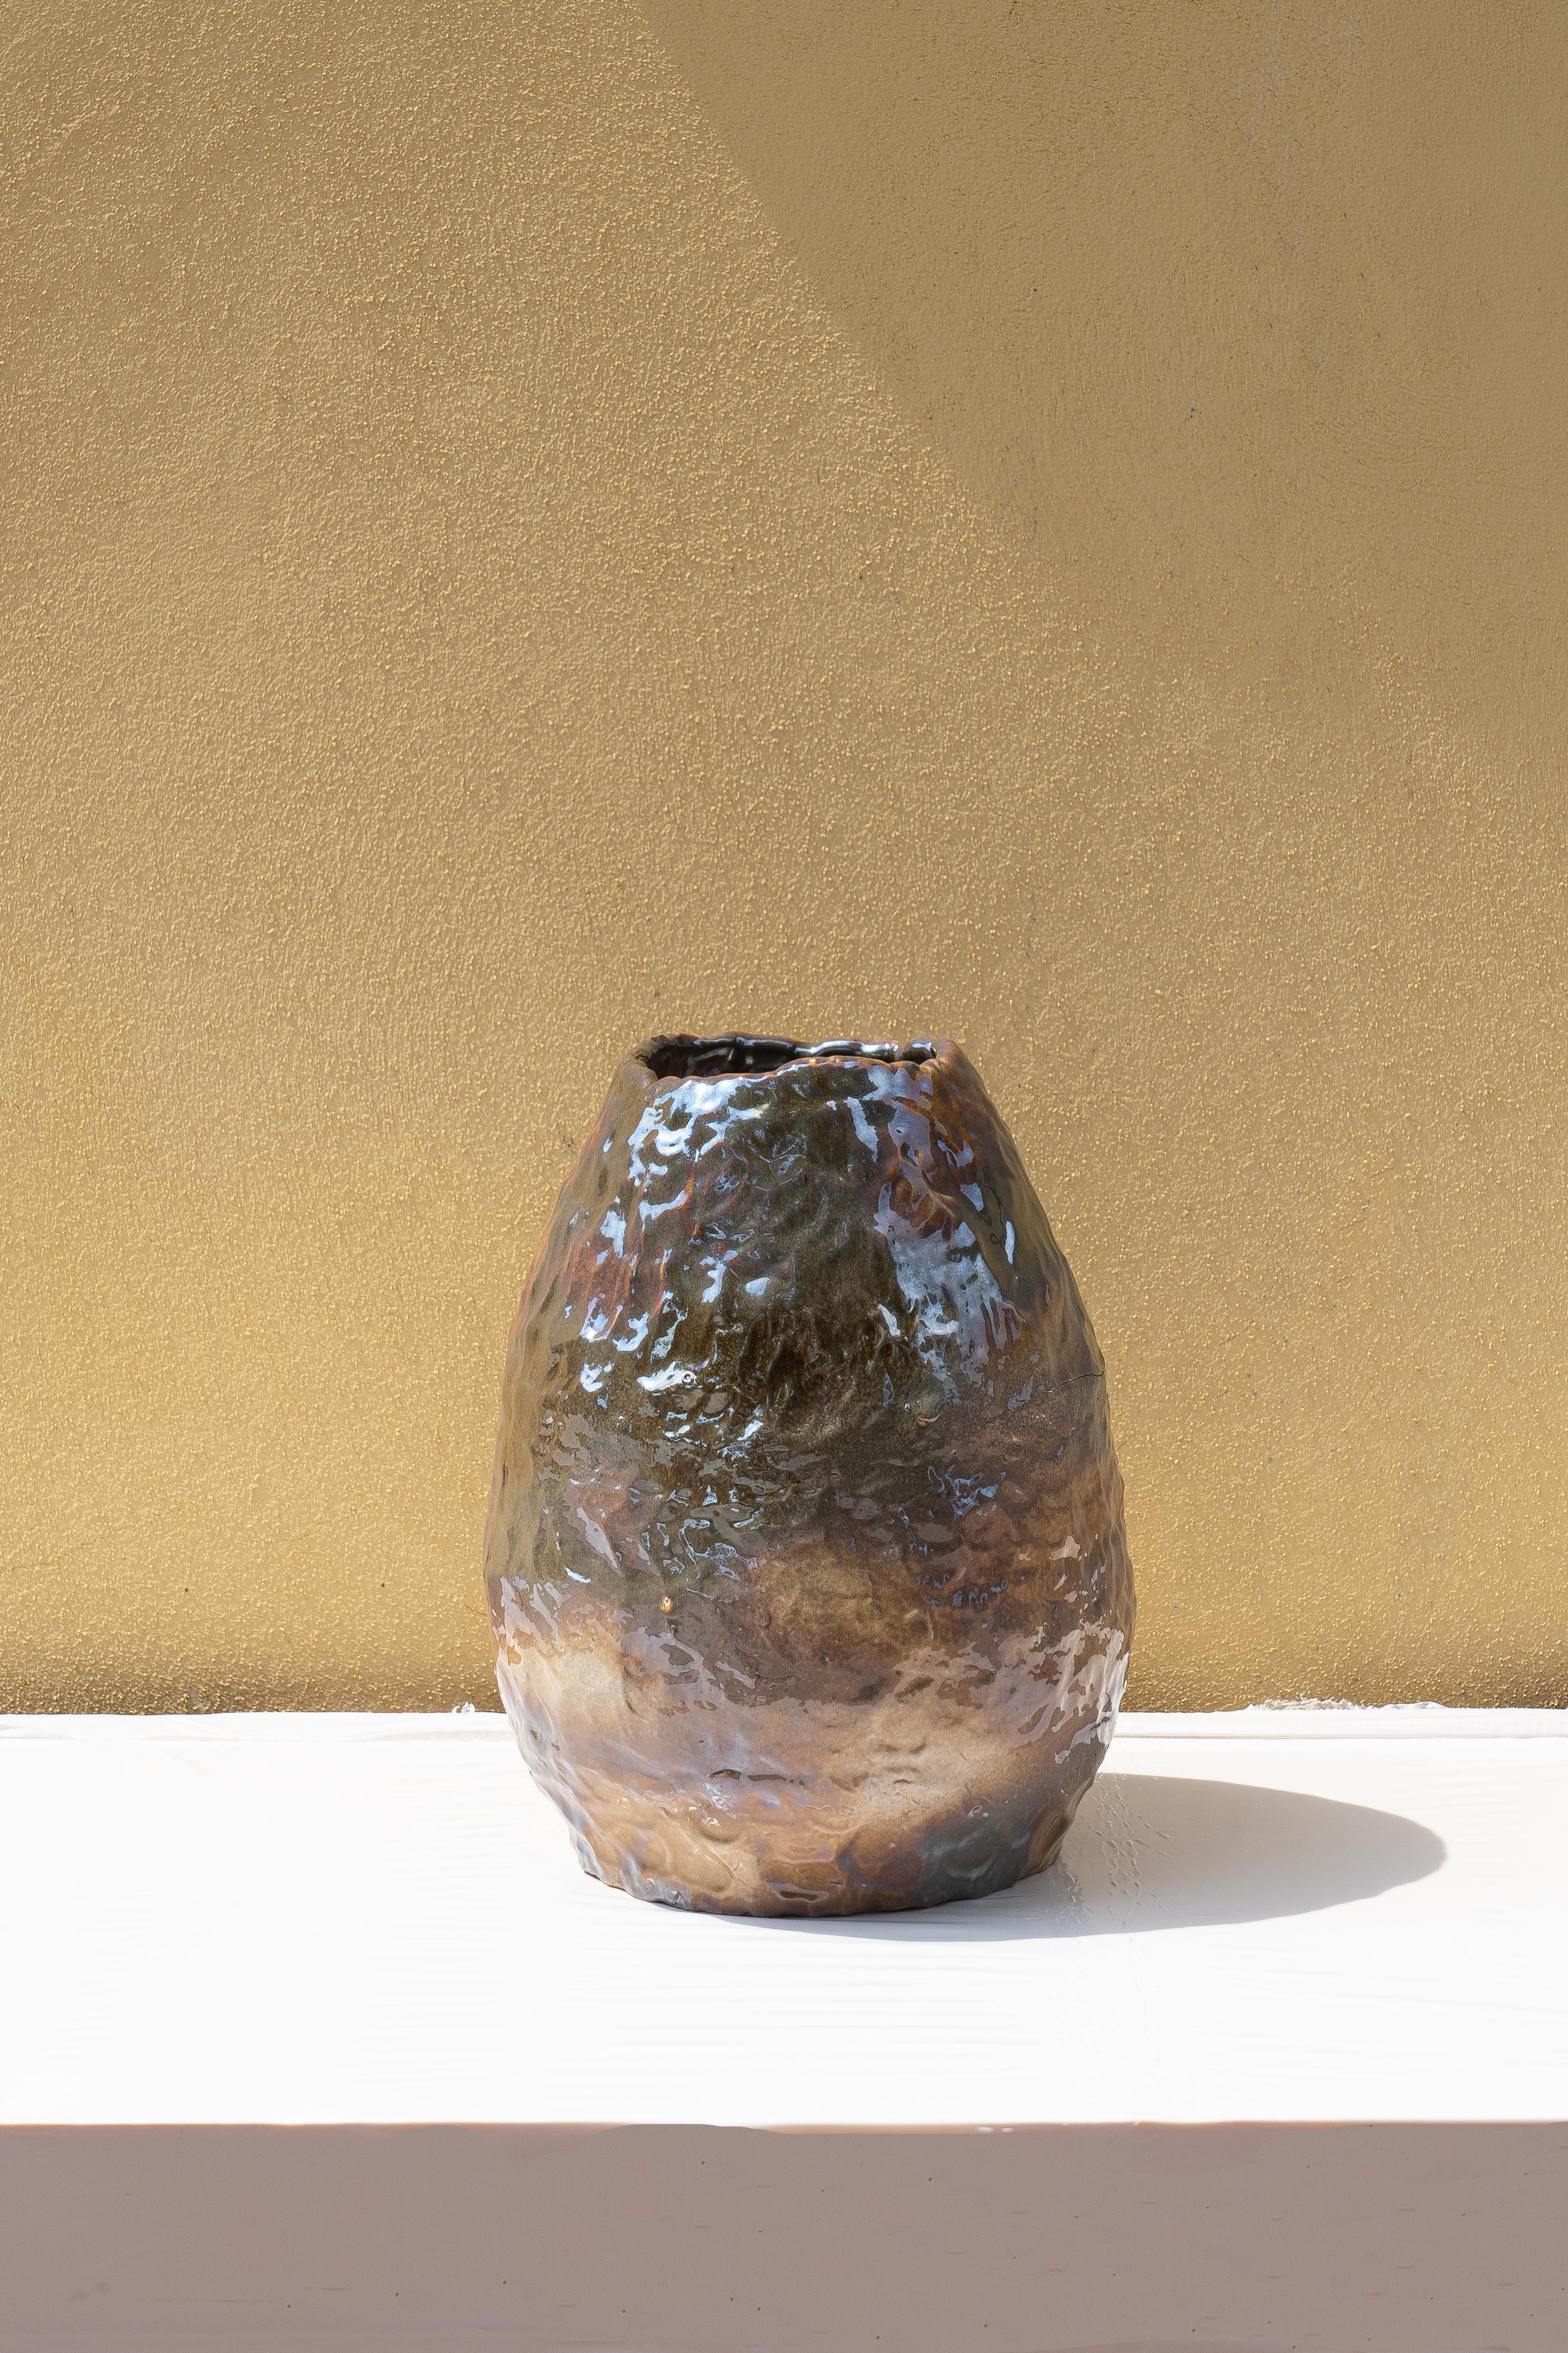 Beige Iridescent vase by Daniele Giannetti
Dimensions: Ø 34 x H 26 cm.
Materials: Glazed terracotta. 

All pieces are made in terracotta from Montelupo, only fired once, then colored by Daniele Giannetti with a white acrylic base, and then a